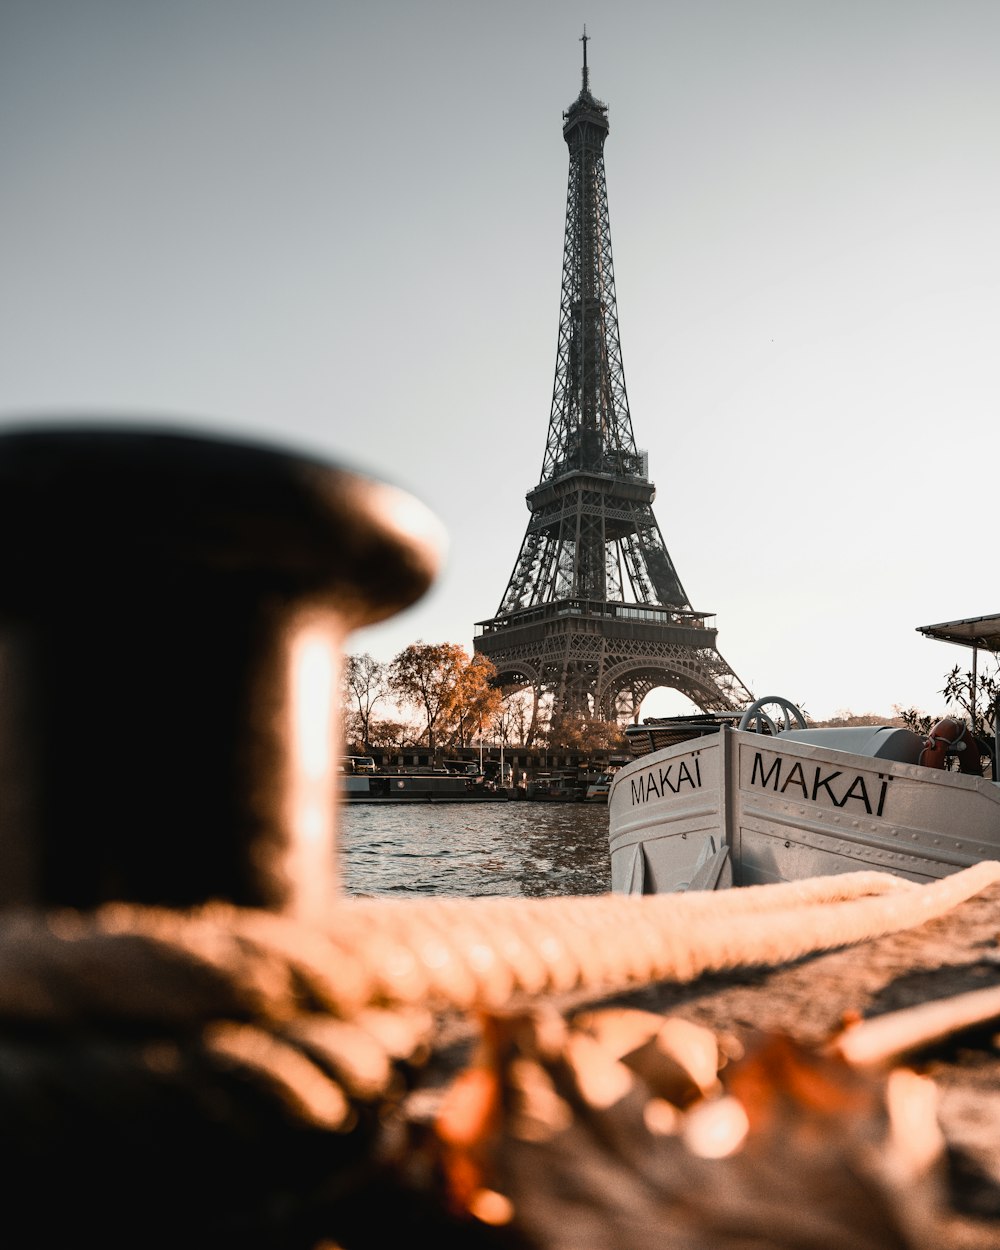 a boat is docked in front of the eiffel tower